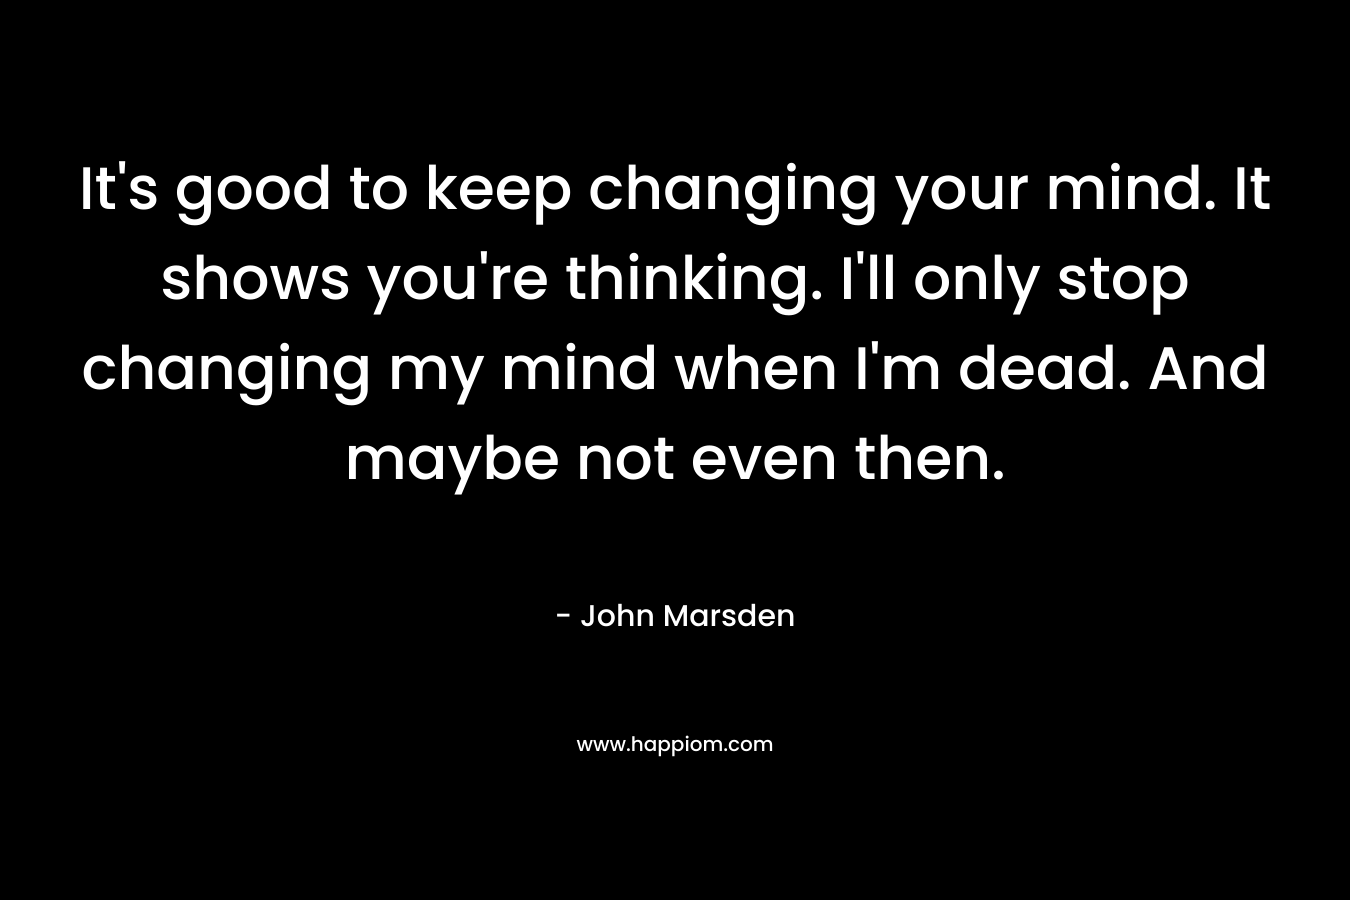 It's good to keep changing your mind. It shows you're thinking. I'll only stop changing my mind when I'm dead. And maybe not even then.